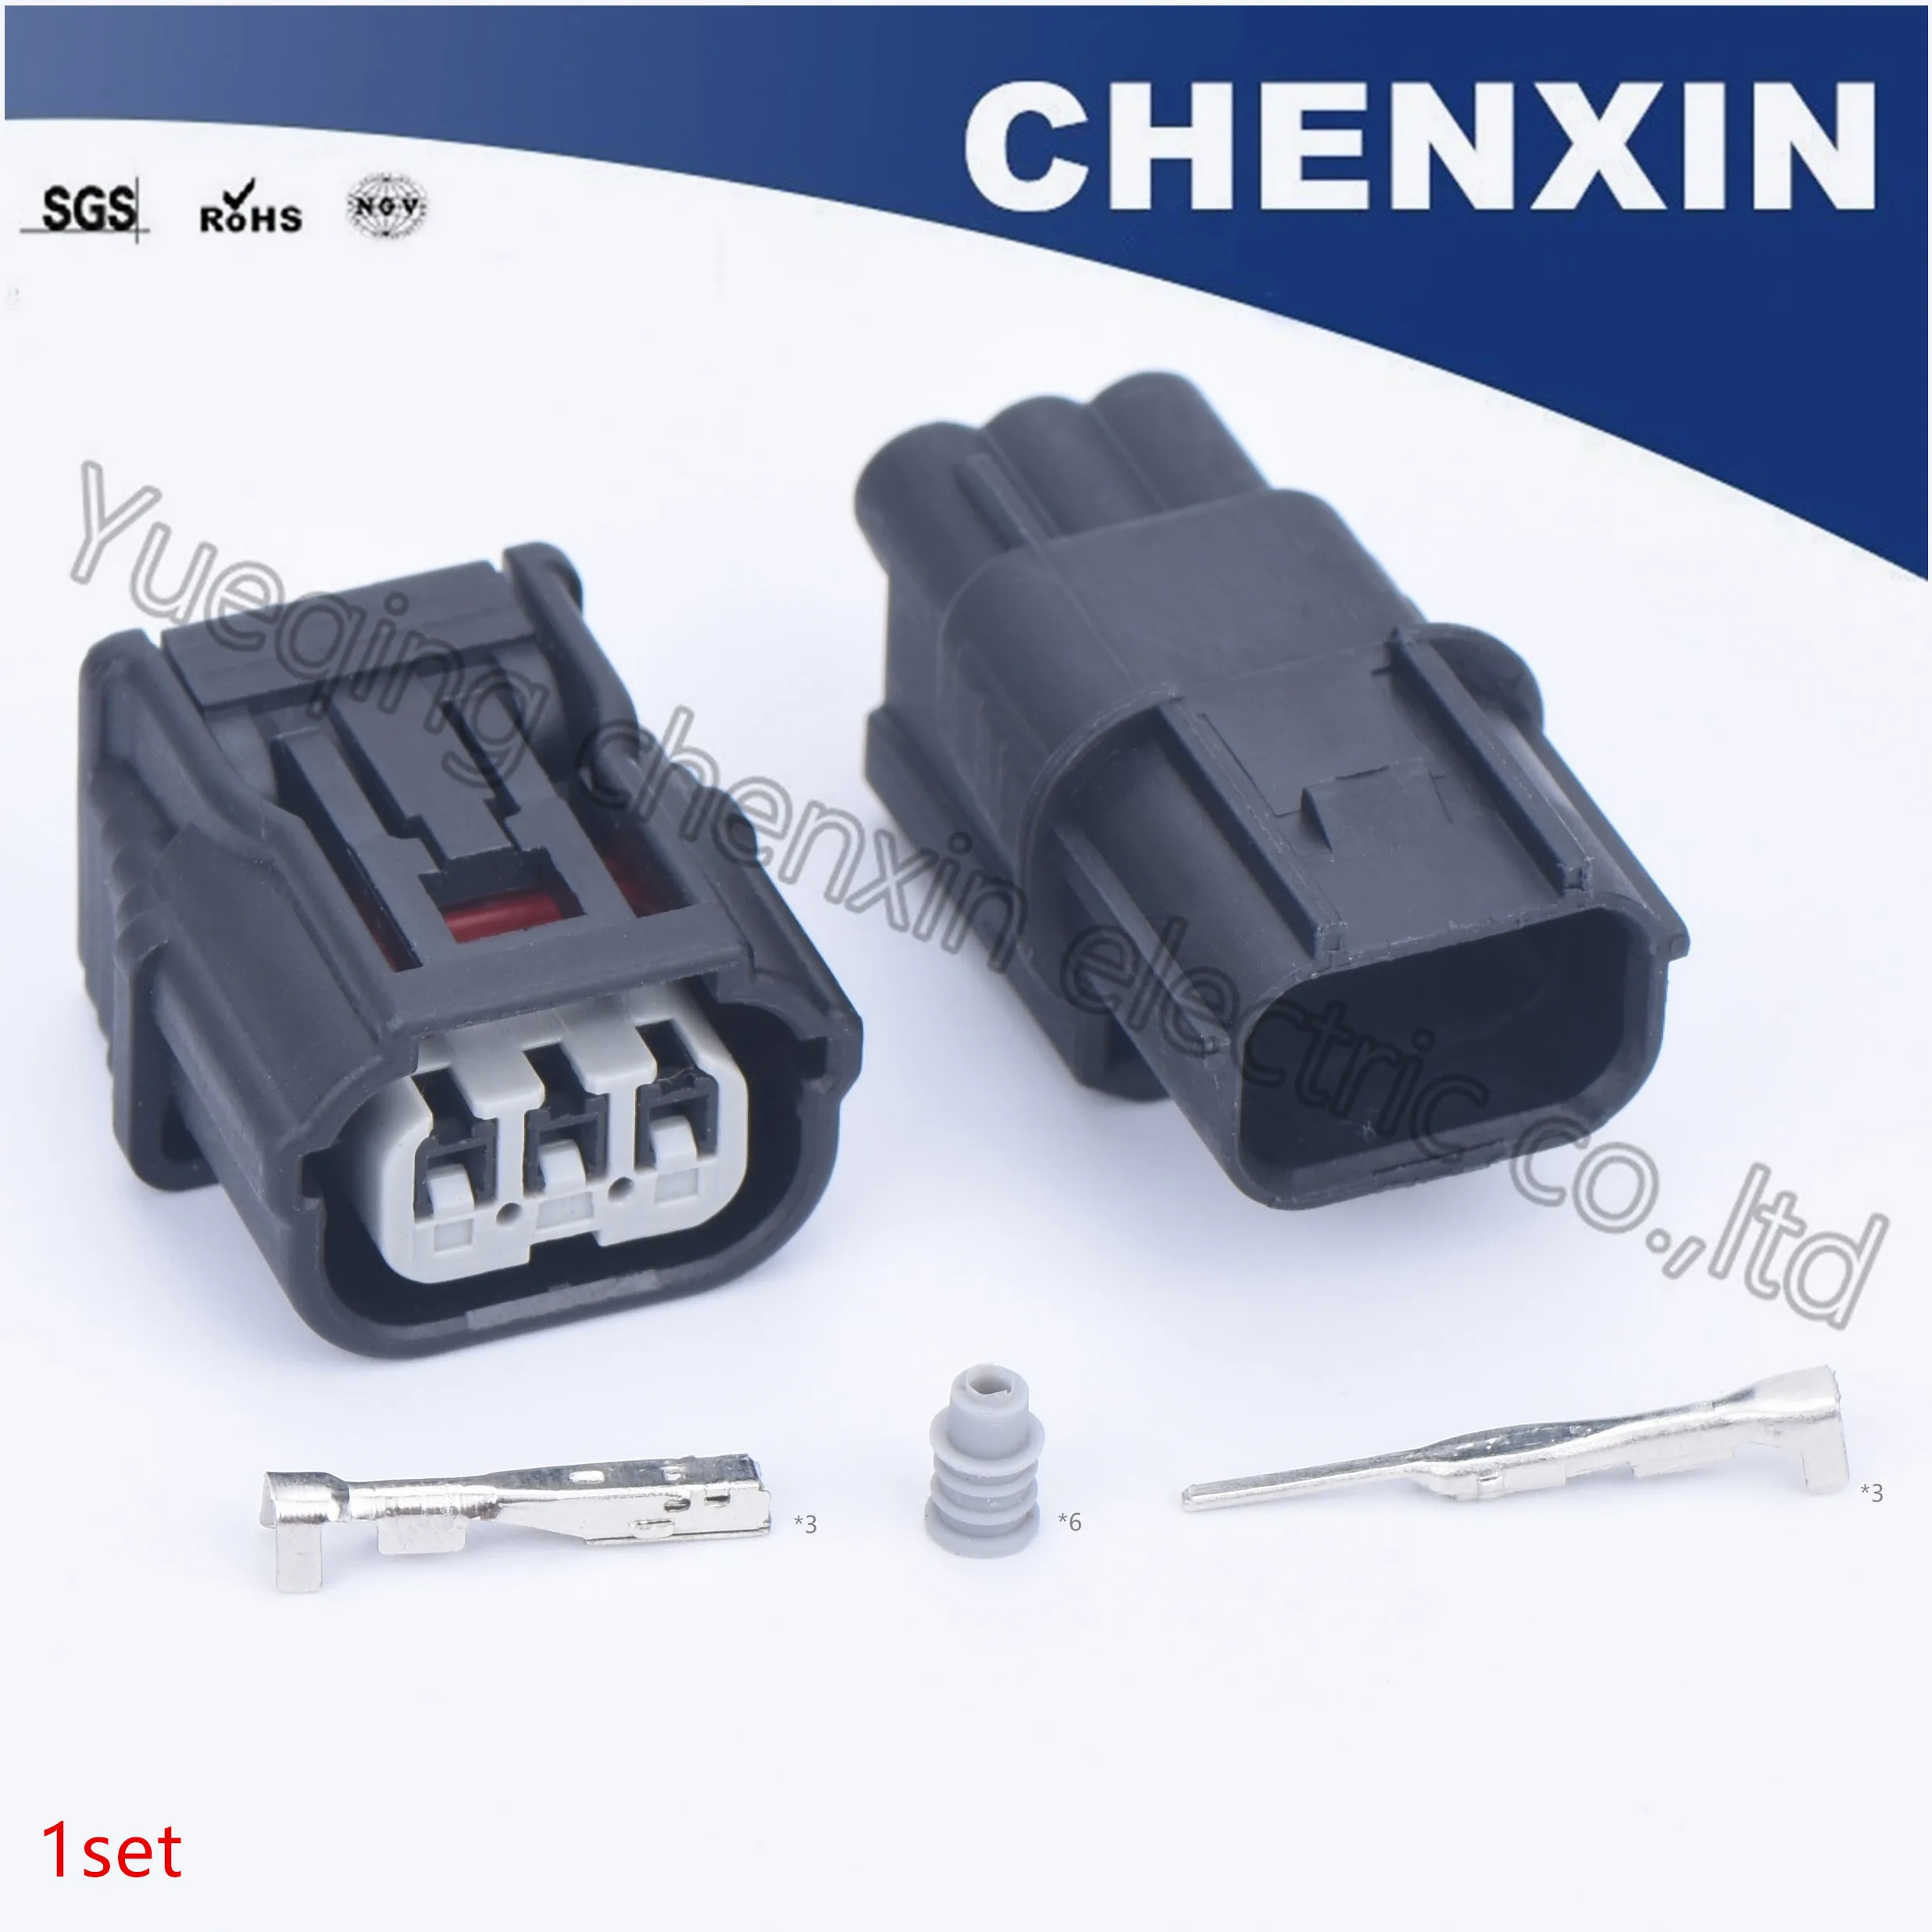 

Black 3 pin car waterproof auto connector 6188-4775 6189-7037 HV 040 (1.0) male and female Ignition coil connector